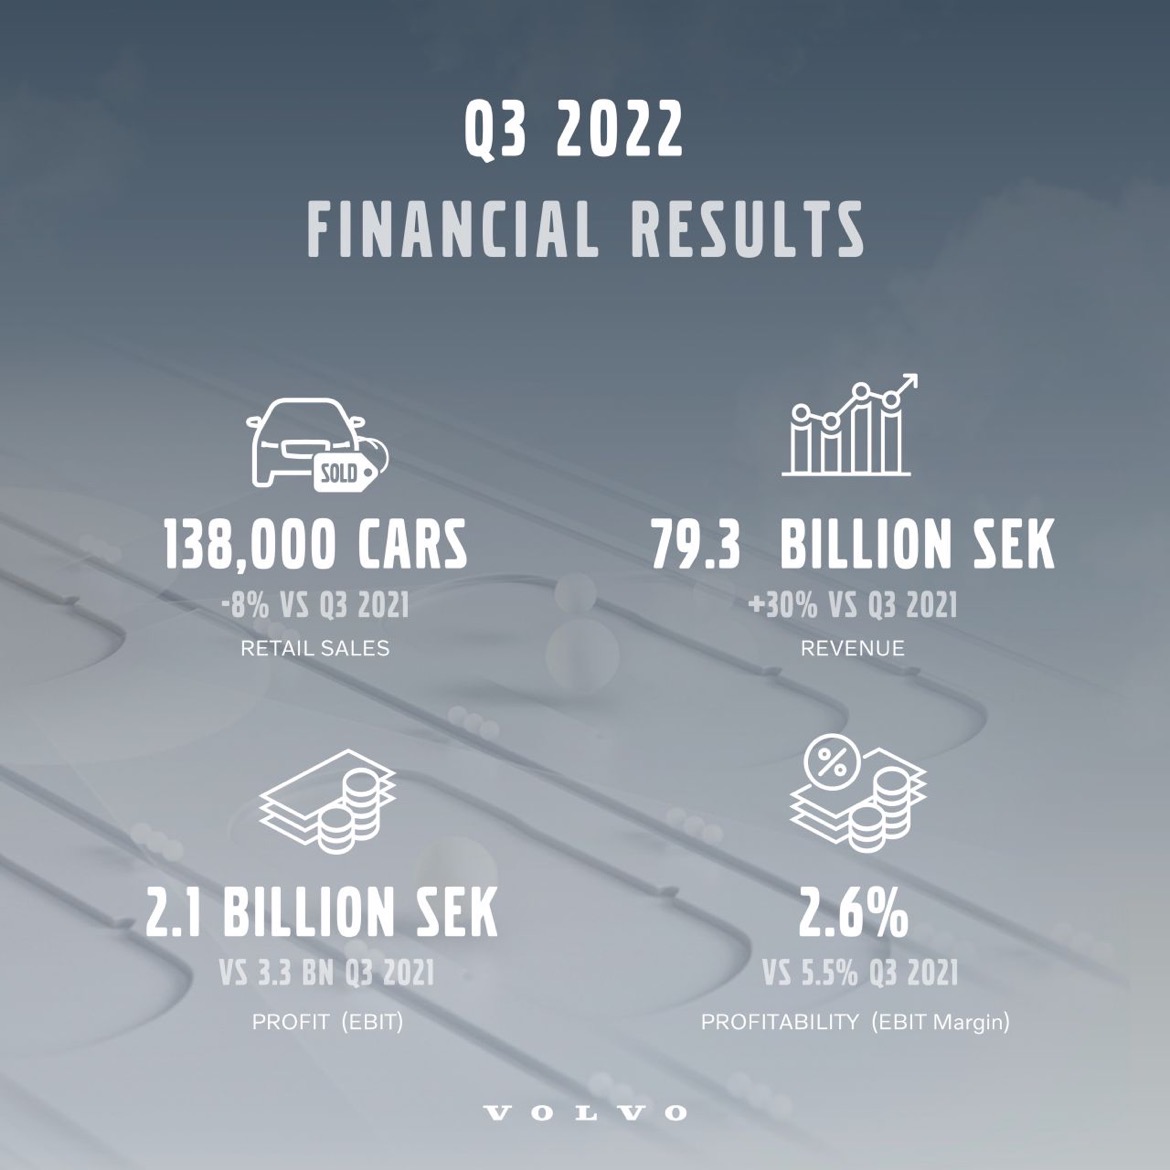 Our Q3 results are out: revenues at 79.3 bn SEK, operating income of 2.1 bn SEK. CEO Jim Rowan: “We are on an exciting path to transform our company towards becoming fully electric and reach climate neutrality by 2040. We remain focused on that. volvoca.rs/3zif1EI